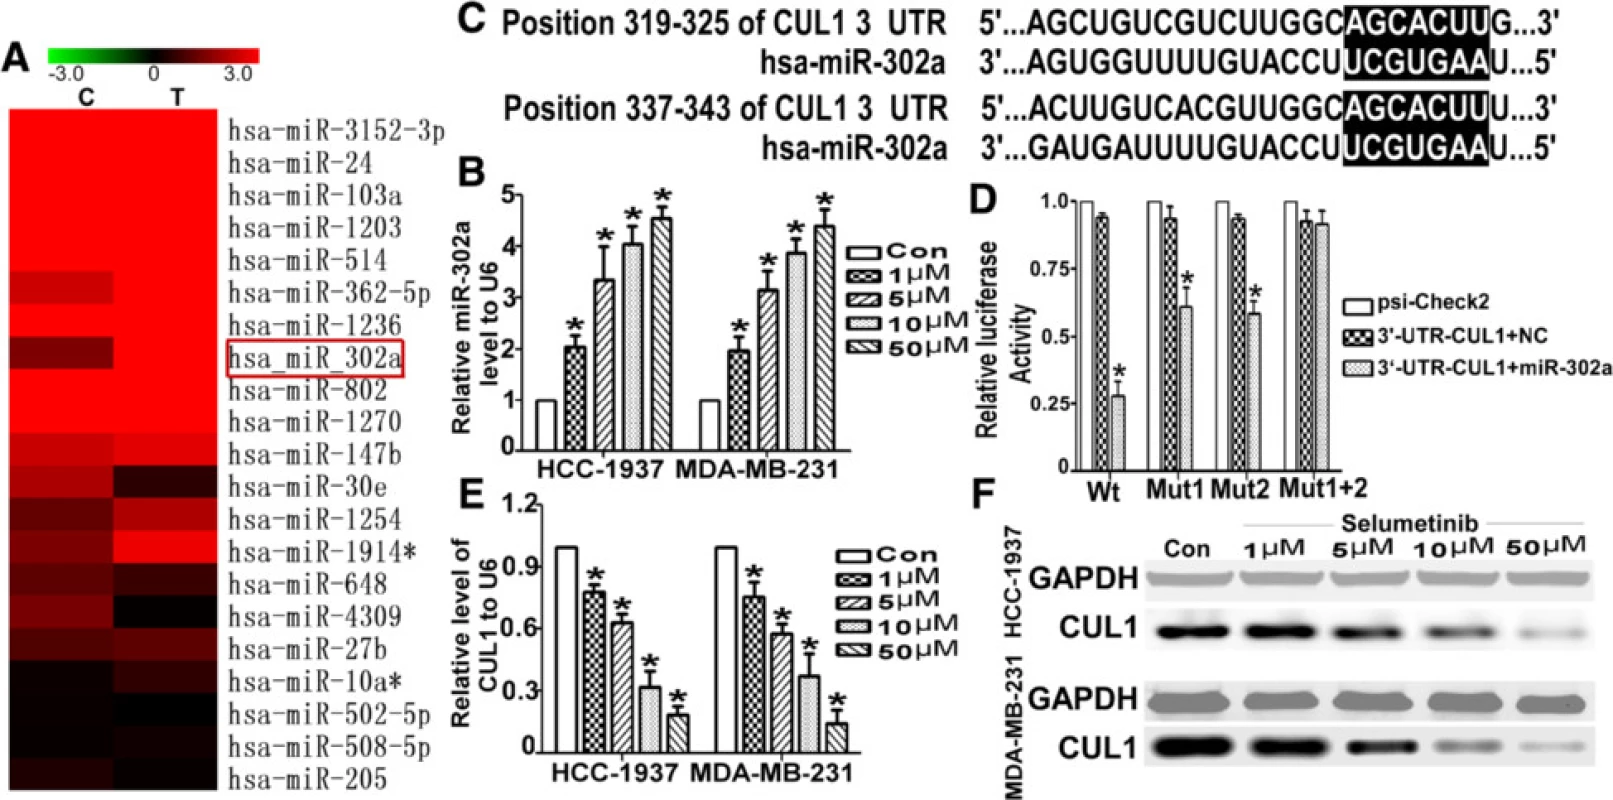 Selumetinib up-regulates miR-302a and down-regulated CUL1 in TNBC cells. a Microarray analysis was used to compare the expression profiles of 703 miRNAs in HCC-1937 cells that were untreated or treated with Selumetinib. MiR-302a, one of most markedly up-regulated miRs, is labeled with a red box. b As detected by qRT-PCR, the miR-302a levels were dramatically increased by approximately 2- to 5-fold in the dosedependent manner in Selumetinib groups compared with the untreated group. (For HCC1973 cells, the miR-302 levels are 2.03 ± 0.41, 3.33 ± 1.12, 4.03 ± 0.61 and 4.53 ± 0.41 respectively. For MDA-MB-231 cells, the miR-302 levels are 1.97 ± 0.47, 3.13 ± 0.67, 3.87 ± 0.47 and 4.41 ± 0.56 respectively.*P &lt; 0.01 compared with the untreated control group, which is 1.). c The selection criteria of the miRNA targets were based on their common detection in the target prediction online databases as well as the full complementarity between the seed region of miR-302a and the 3′UTR of CUL1. d HEK 293 cells were co-transfected with miR-302a-MIMIC, psi-Check2, WT-psi-Check2-CUL1 or MUT-psi-Check2-CUL1. The luciferase activity levels were measured 24 h after transfection. The results from at least three independent experiments are presented as the means ± SE. In this panel, the luciferase assay results show the regulation of CUL1 by miR-302a (For Wt group, after transfect the miR-302 the luciferase activity was only 0.27 ± 0.05. As for mutated the first seed sequence, the luciferase activity was 0.62 ± 0.07. As for mutated the second seed sequence, luciferase activity was 0.57 ± 0.04. *P &lt; 0.01 compared with the control group, which is 1.). e The CUL1 mRNA level was reduced with the exposed under Selumetinib in dose-dependent manner (For HCC1973 cells, the CUL1 levels are 0.81 ± 0.04, 0.63 ± 0.08, 0.43 ± 0.14 and 0.23 ± 0.07 respectively. For MDA-MB-231 cells, the CUL1 levels are 0.78 ± 0.07, 0.64 ± 0.11, 0.37 ± 0.07 and 0.24 ± 0.05 respectively.*P &lt; 0.01 compared with the untreated control group, which is 1.). f The change of CUL1 protein has showed a similar trend